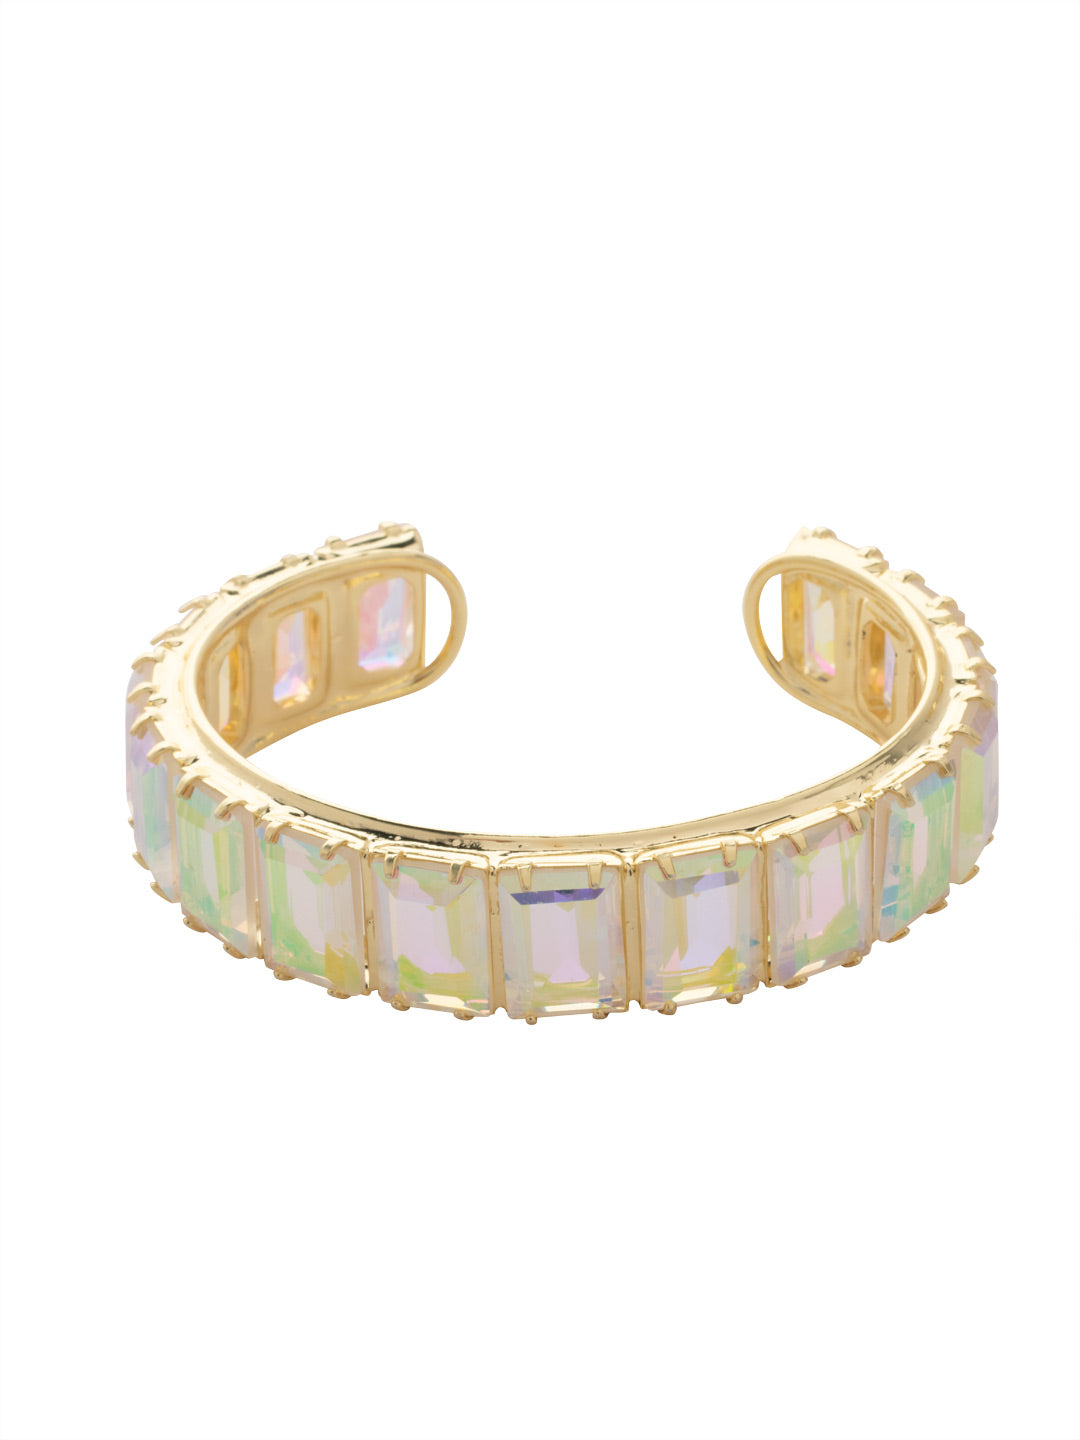 Julianna Emerald Cut Cuff Bracelet - BFD78BGCAB - <p>The Julianna Emerald Cut Cuff Bracelet features a row of rectangle cut candy drop crystals around an adjustable cuff bracelet band. From Sorrelli's Crystal Aurora Borealis collection in our Bright Gold-tone finish.</p>